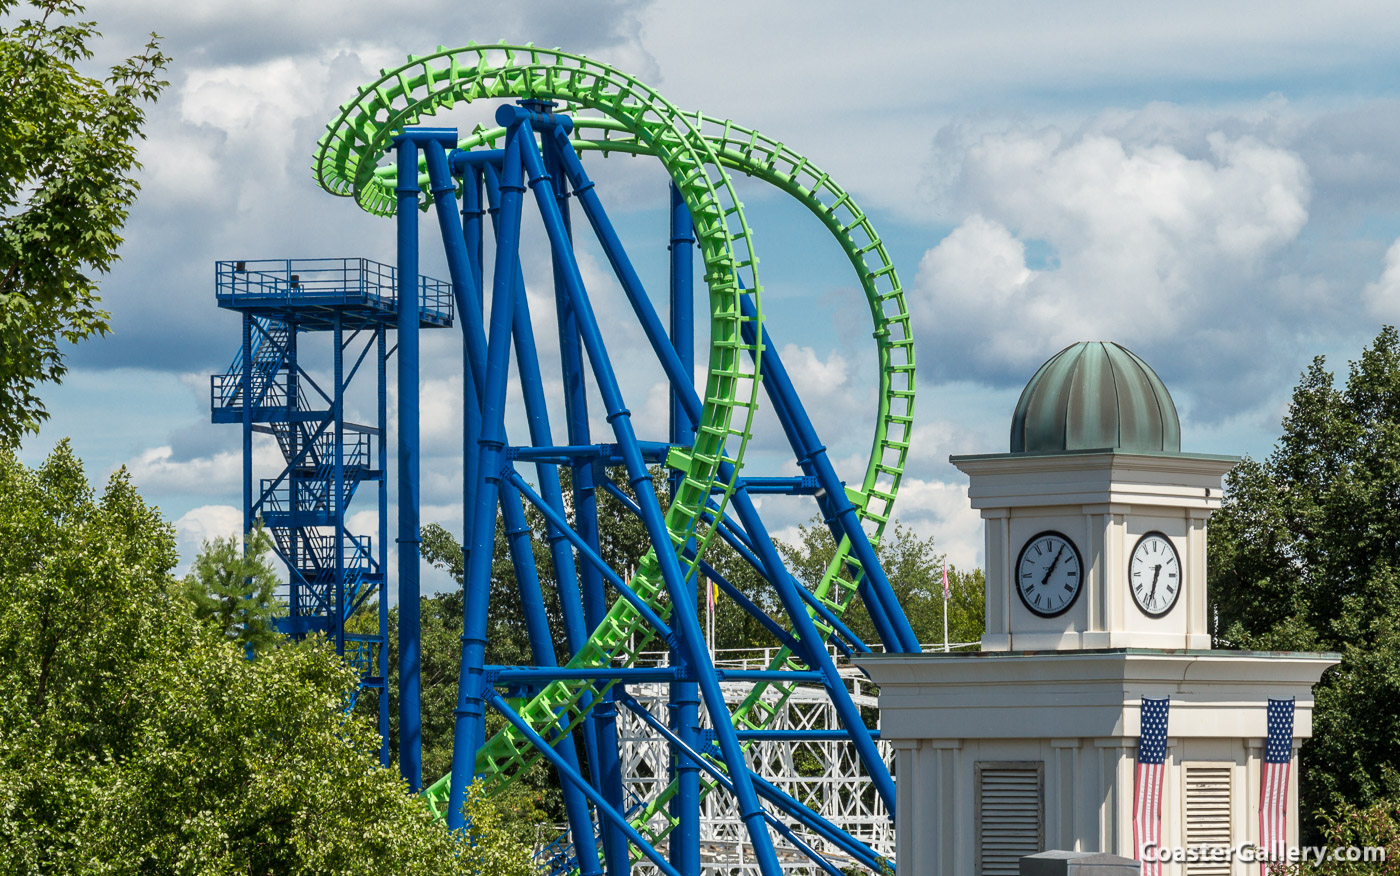 Goliath roller coaster at Six Flags New England